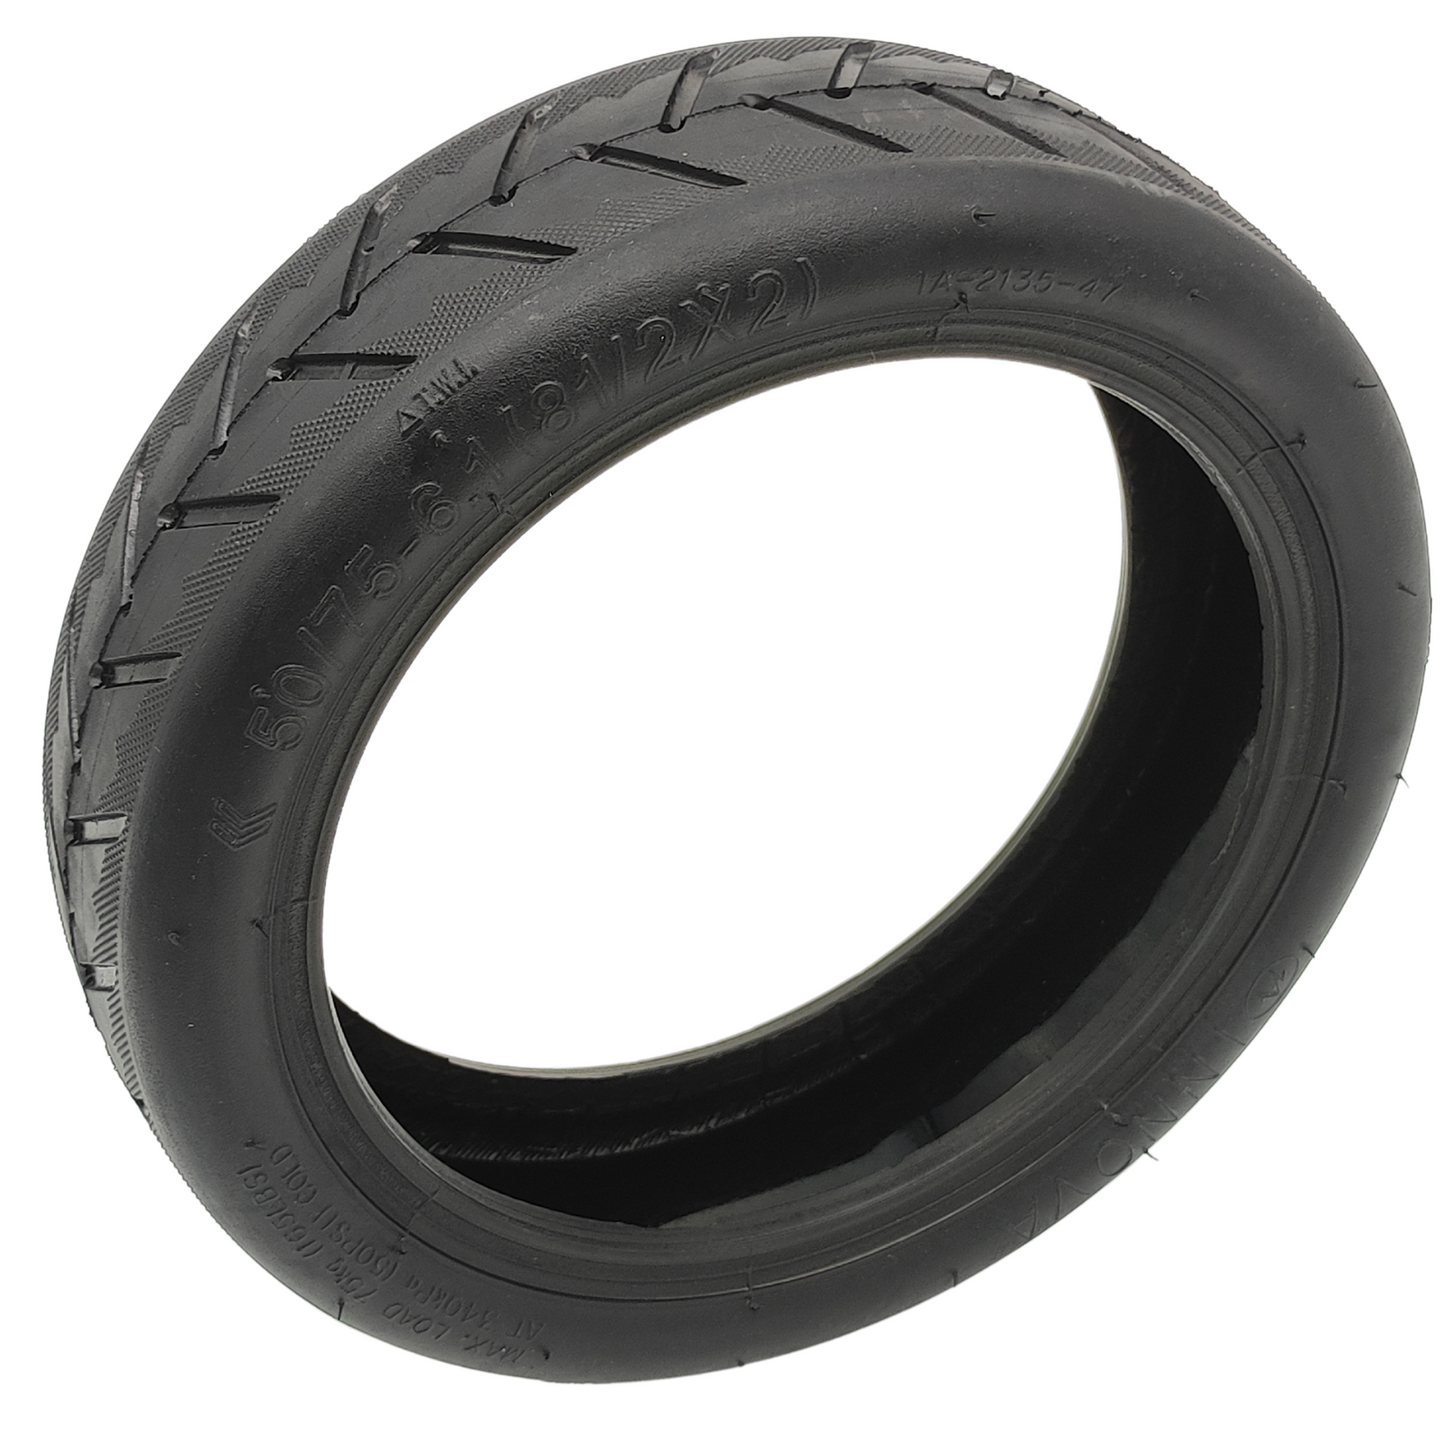 8.5x2 inch 50/75-6.1 tubeless tires with gel layer for e-scooters